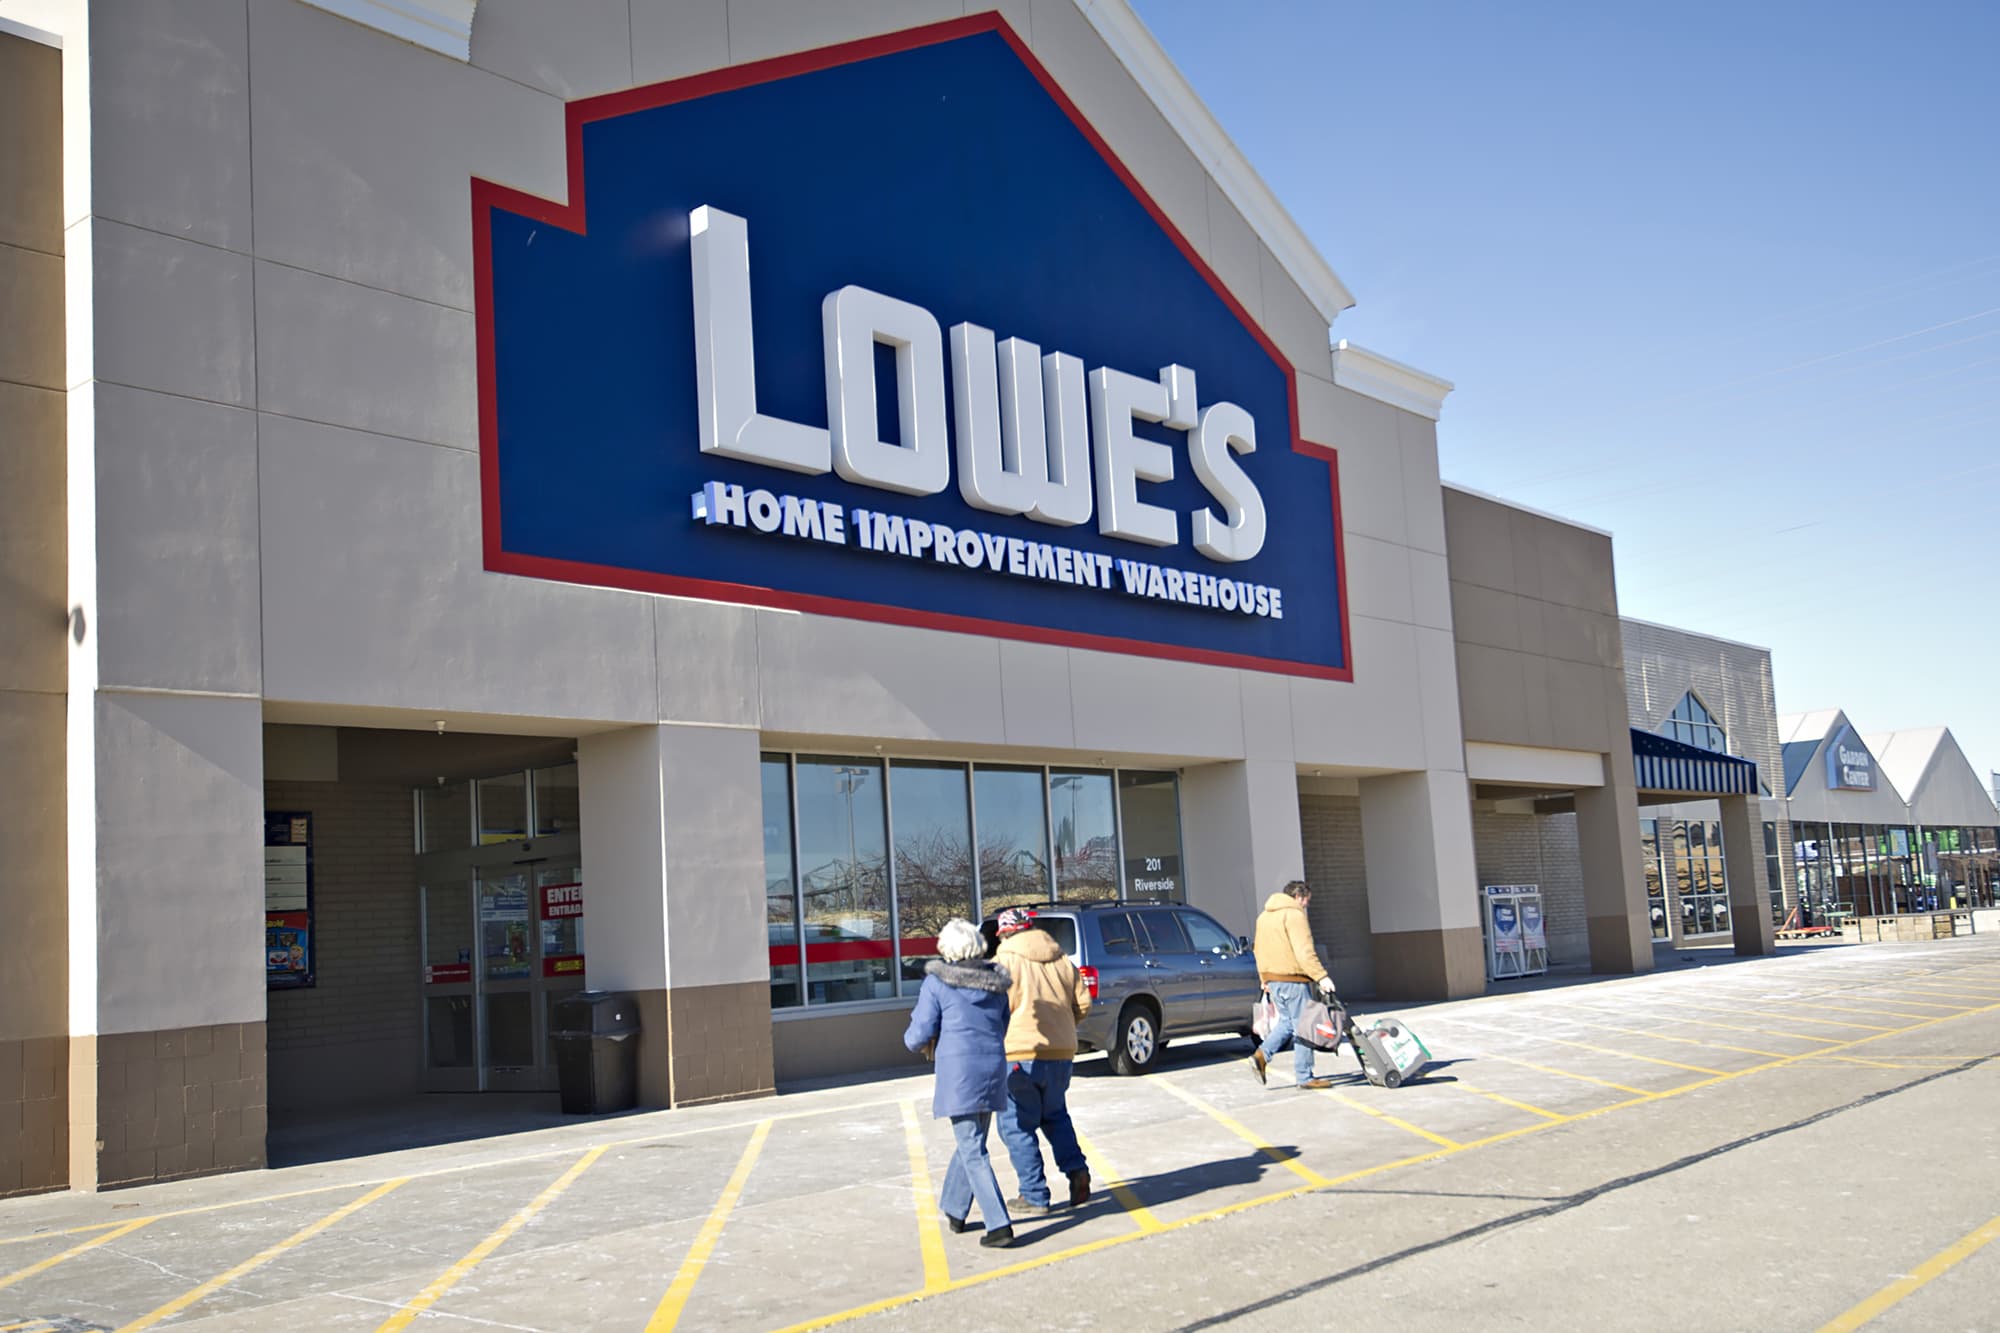 Lowe's funds $25 million in grants to help minority businesses reopen